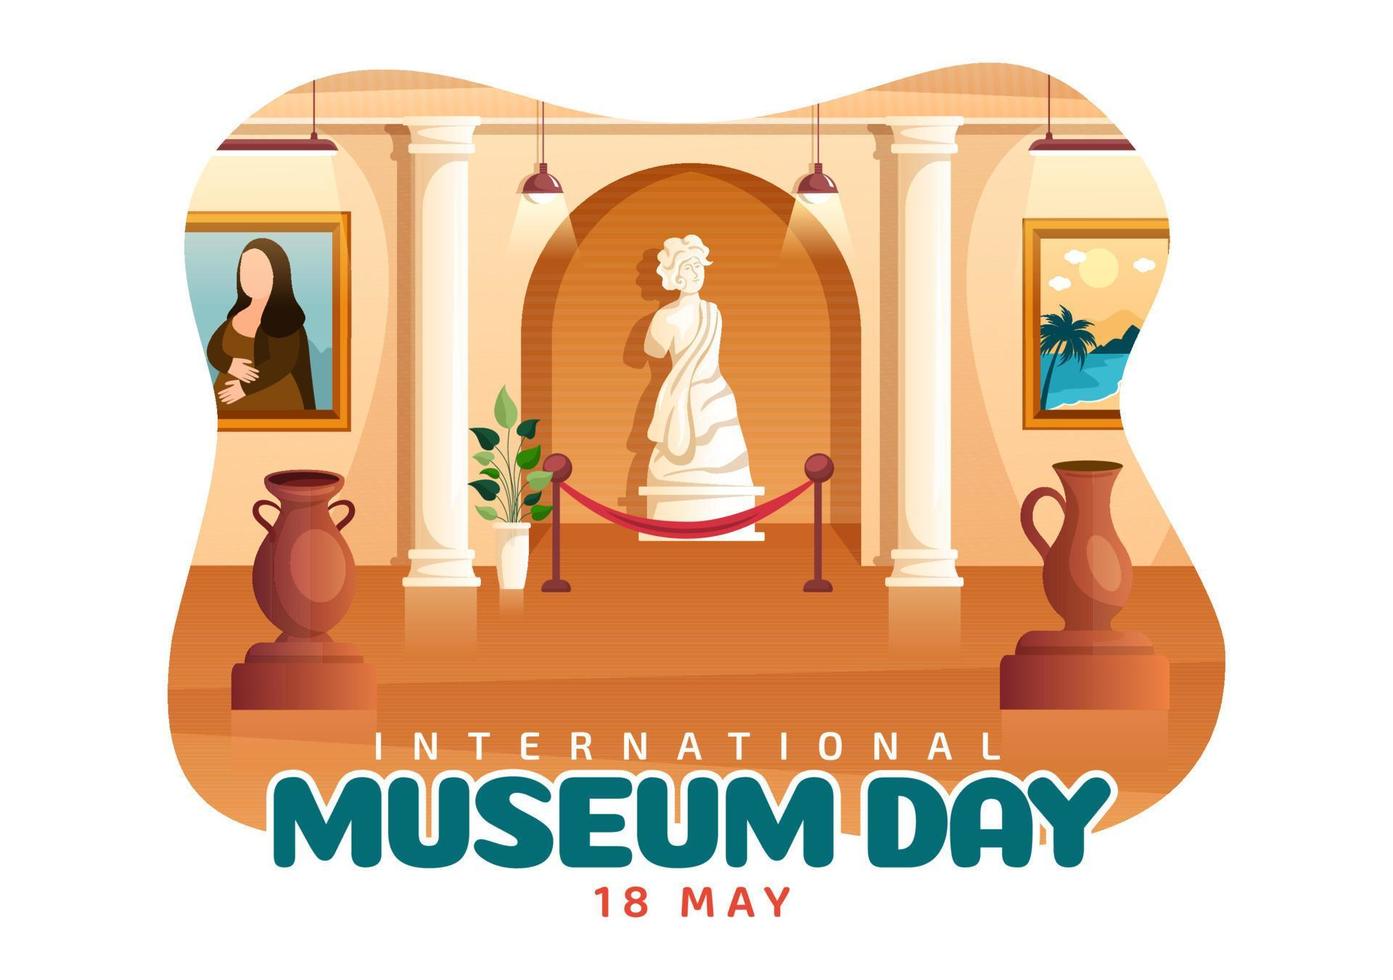 International Museum Day on May 18 Illustration with Building Gallery or Artworks in Flat Cartoon Hand Drawn for Web Banner or Landing Page Templates vector